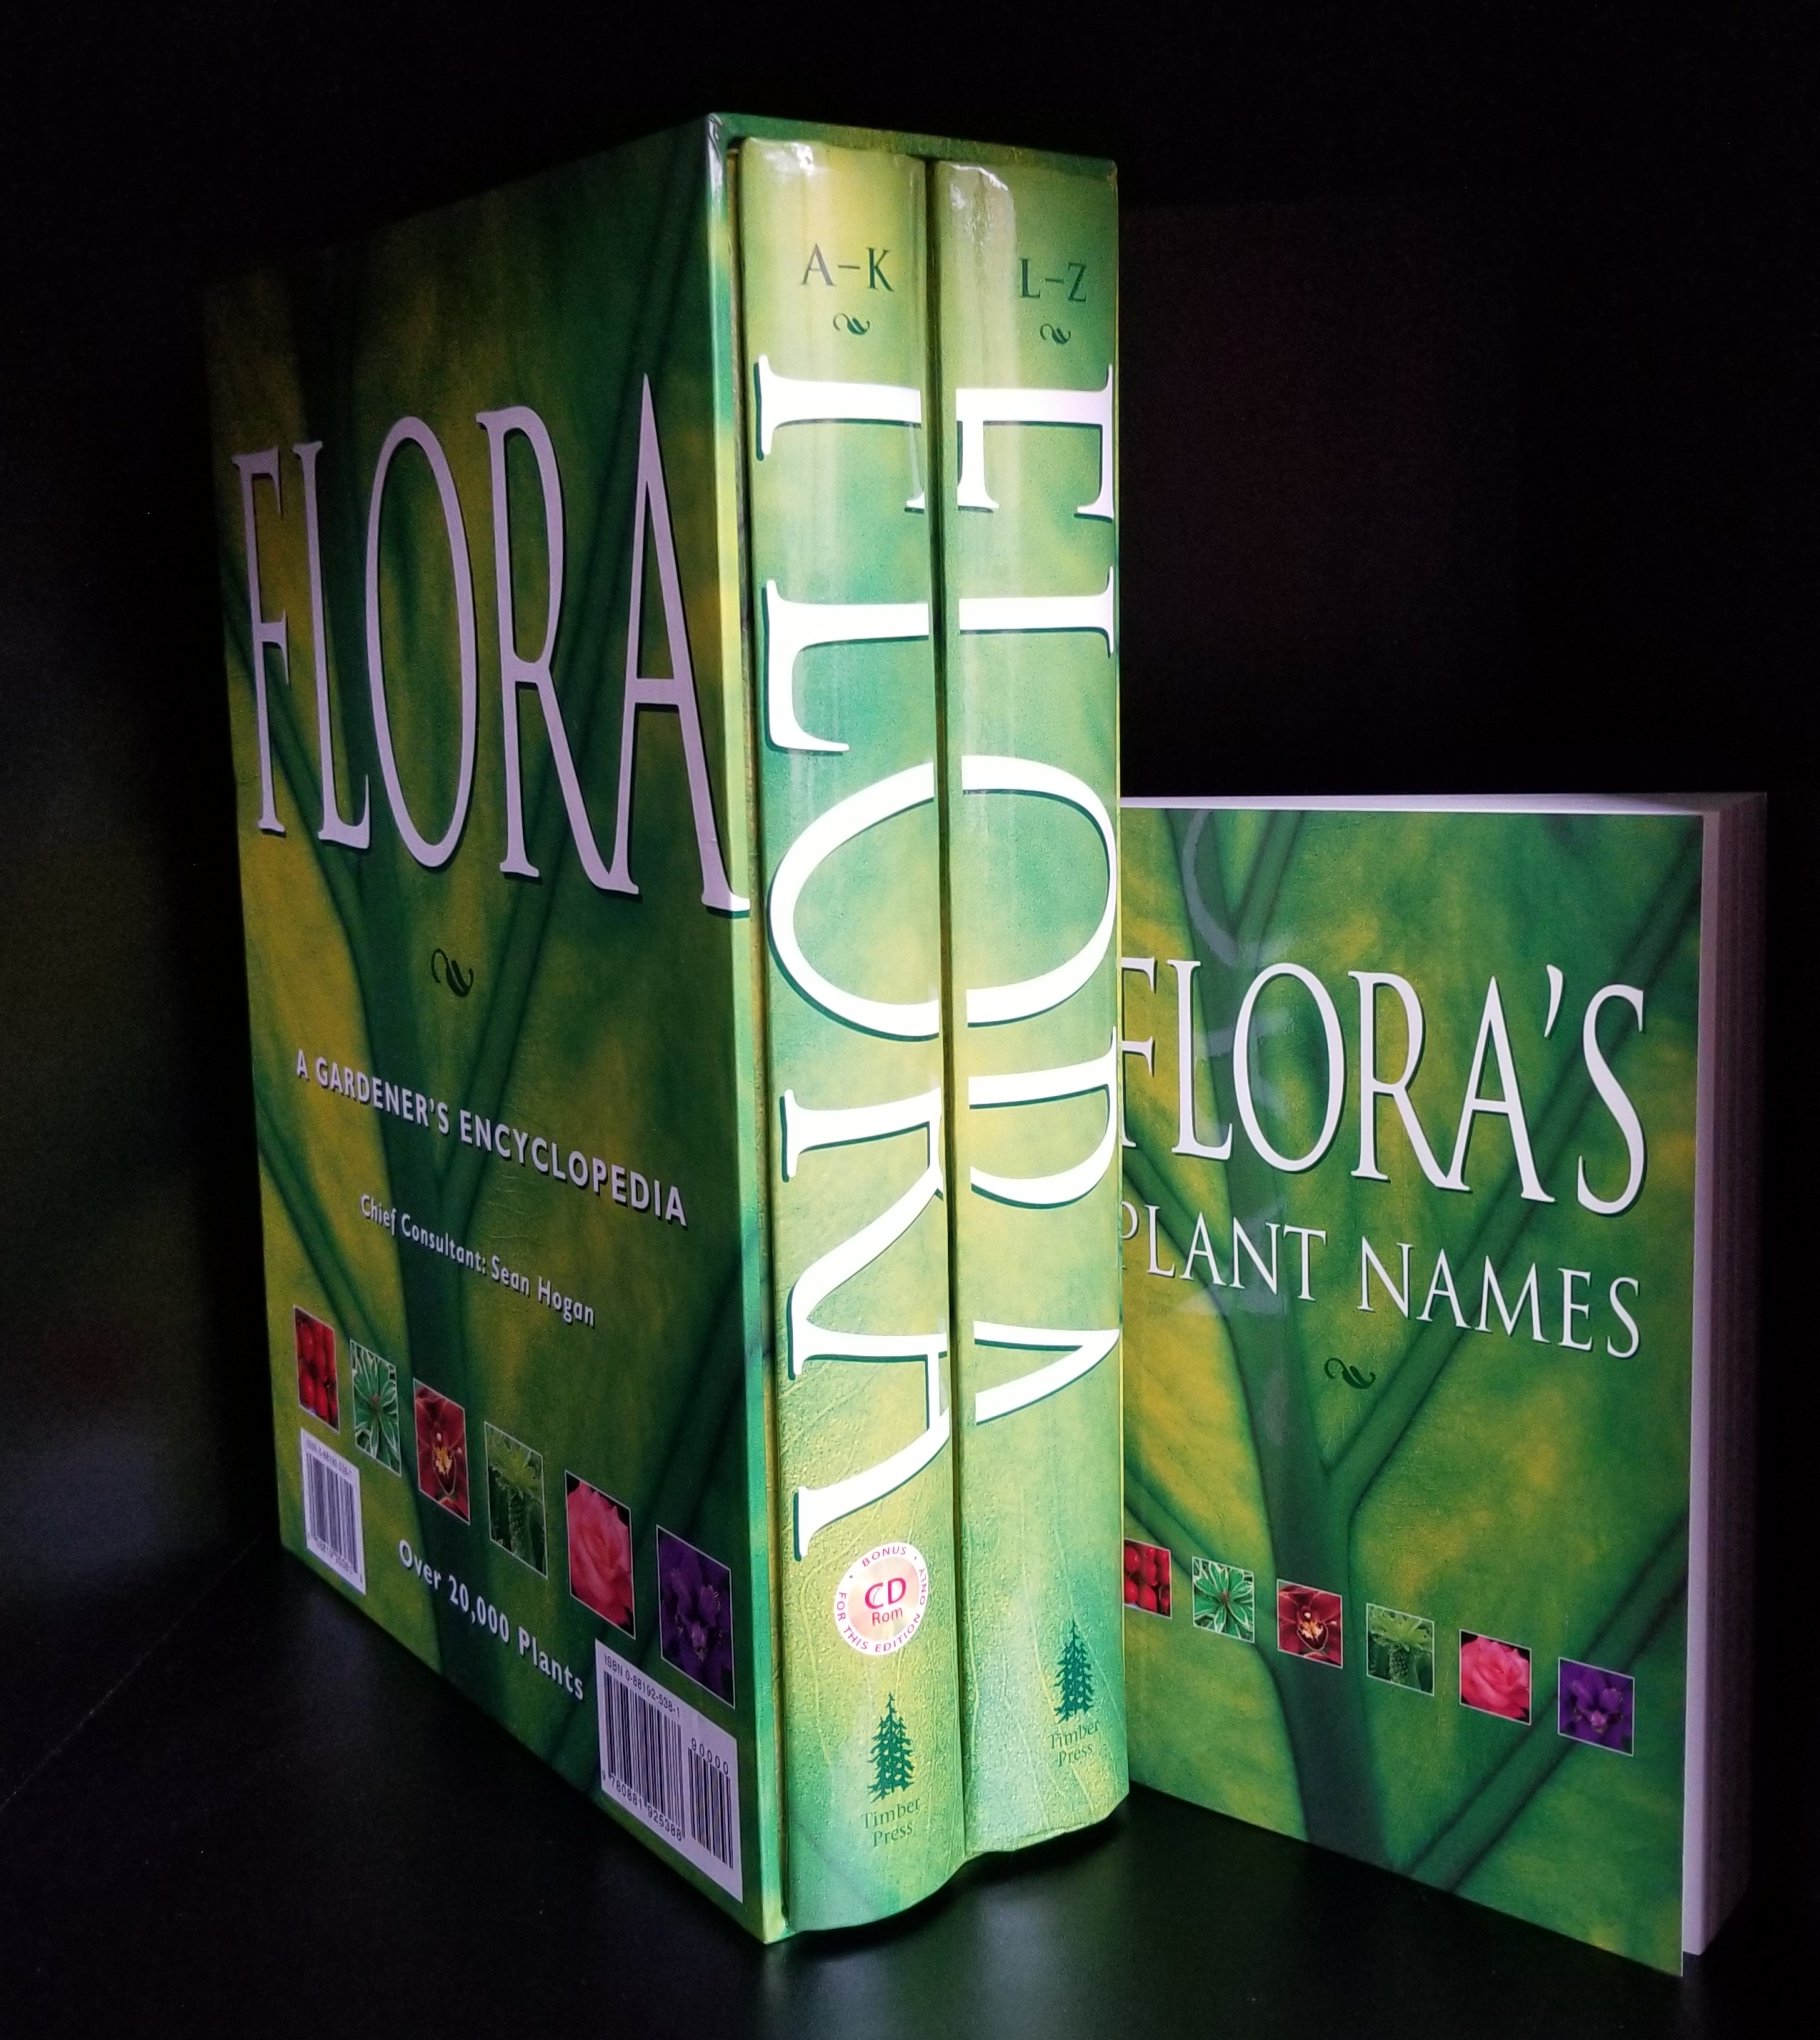 Image for Flora: A Gardener's Encyclopedia 2 volume set , vol 1 A-K vol 2 L-Z, with CD-ROM and  companion volume Flora's Plant Names.